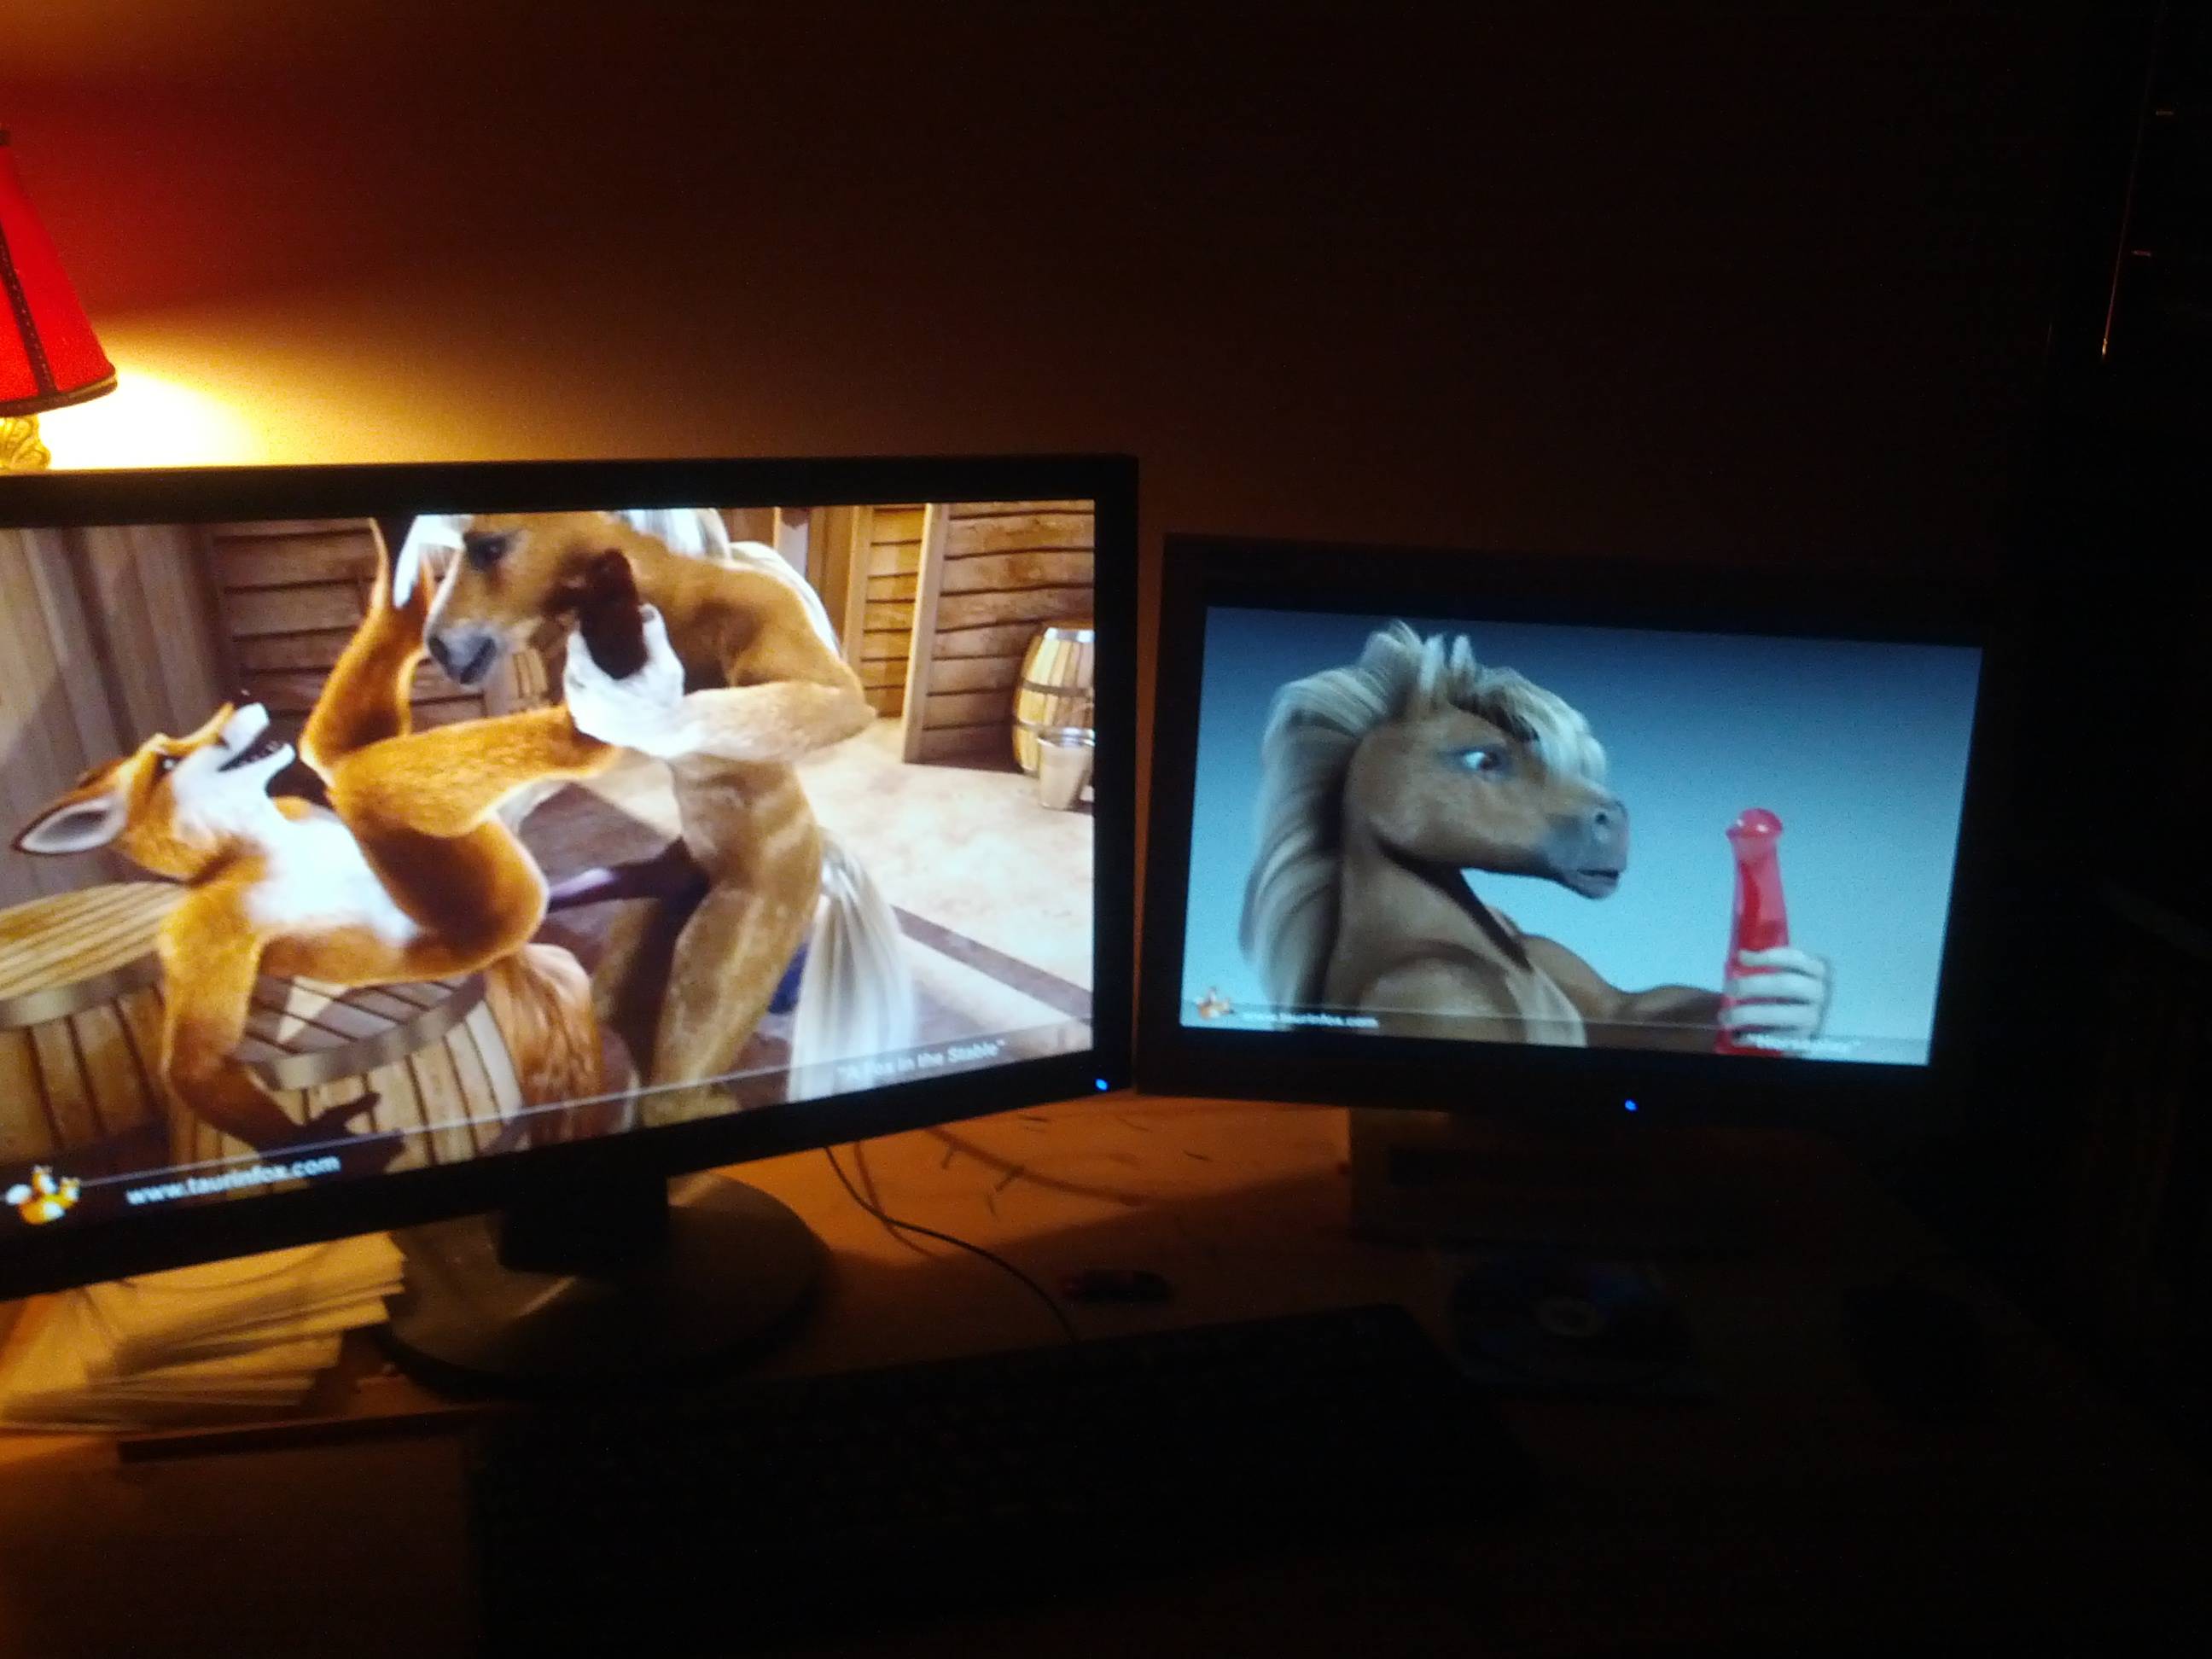 anal anal_sex barrel canine computer_mouse dark desk dildo disc dual dual_monitors equine fox furry gay horse inside keyboard lamp lamp_shade male monitor no_humans nude penetration pornography sex sex_toy taurin_fox usb